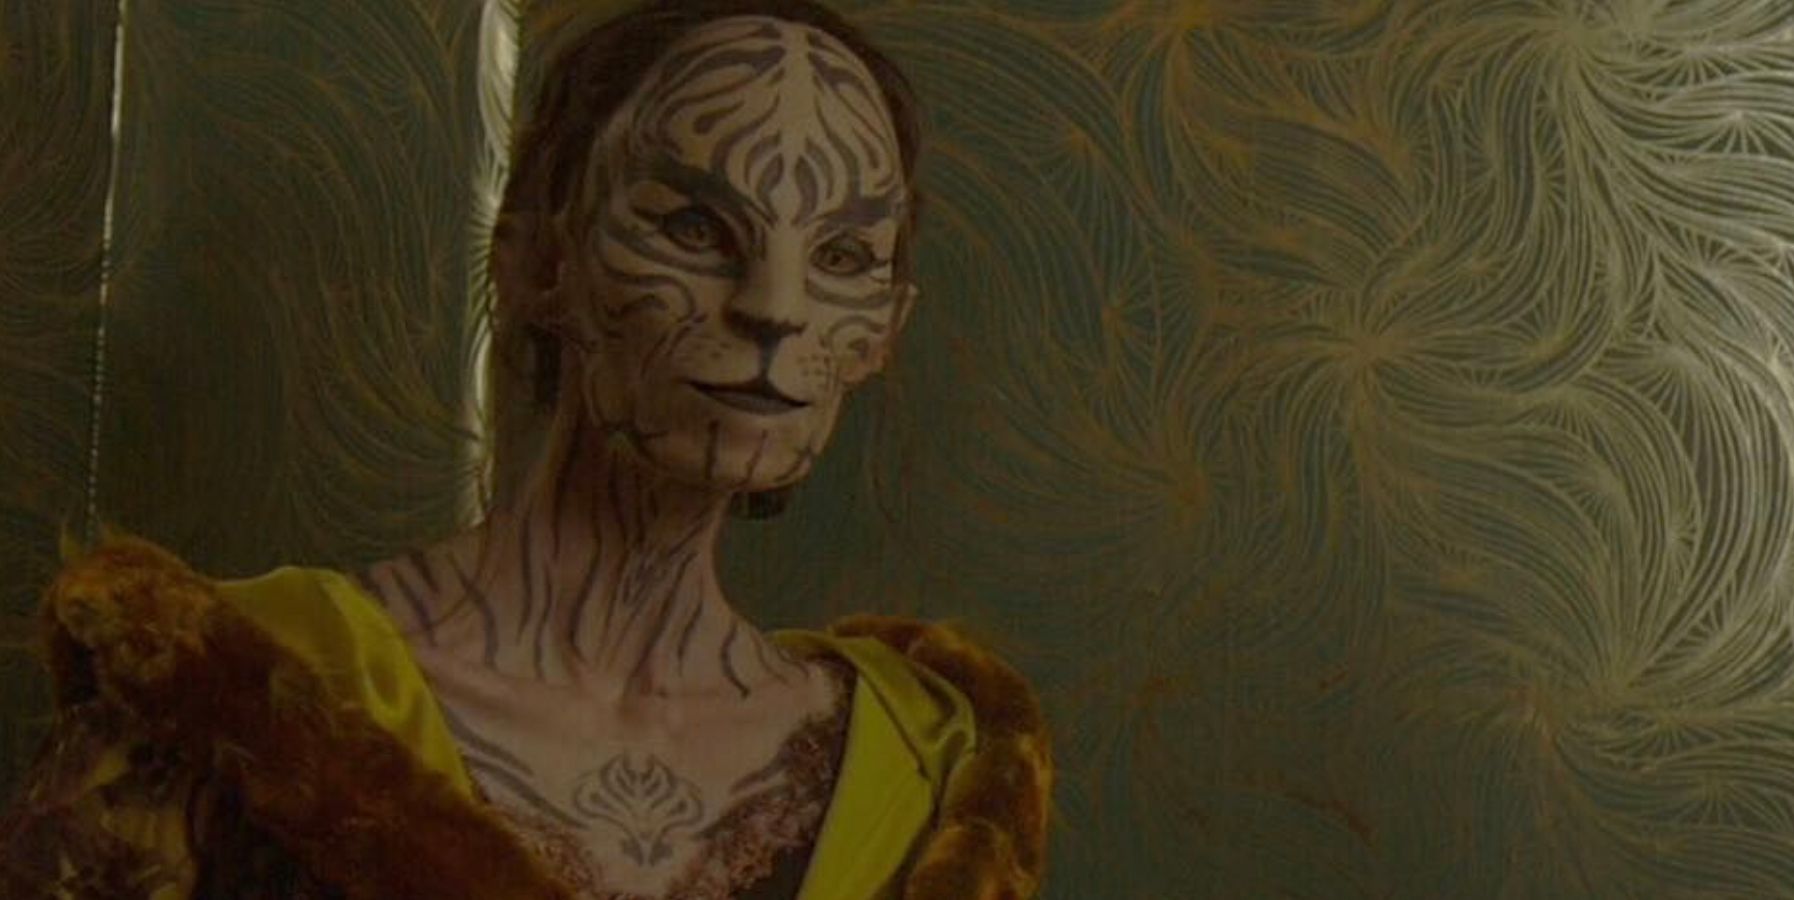 Tigris with her feline markings when she first meets Katniss in Hunger Games Mockingjay